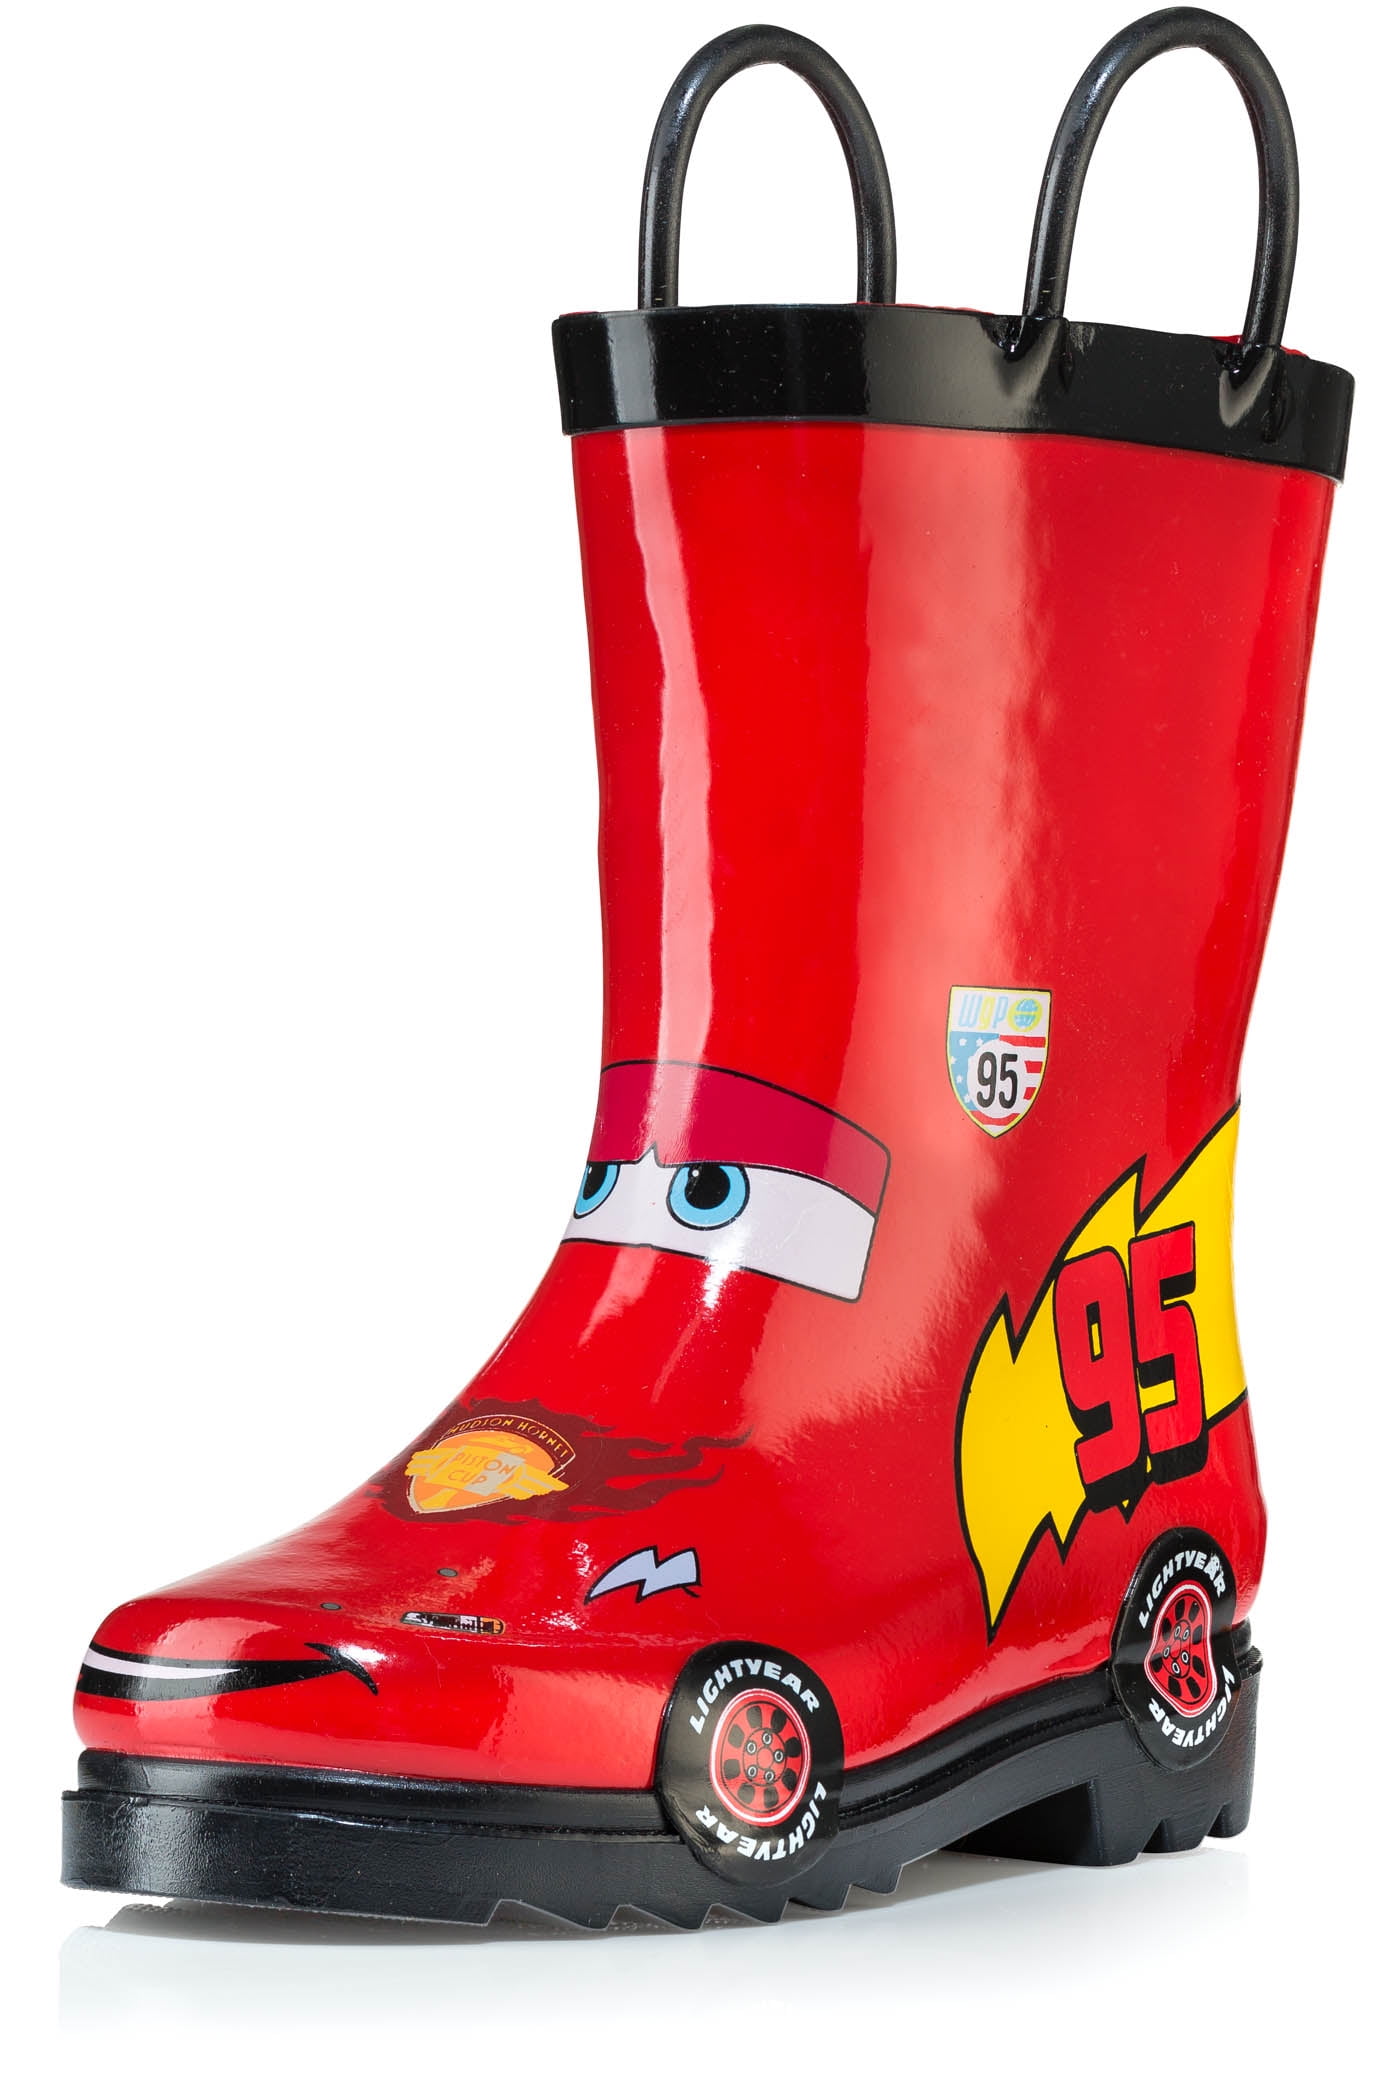 Cars Disney Winter Boots Toddler Boy's size 11 or 12 New w/Tag 